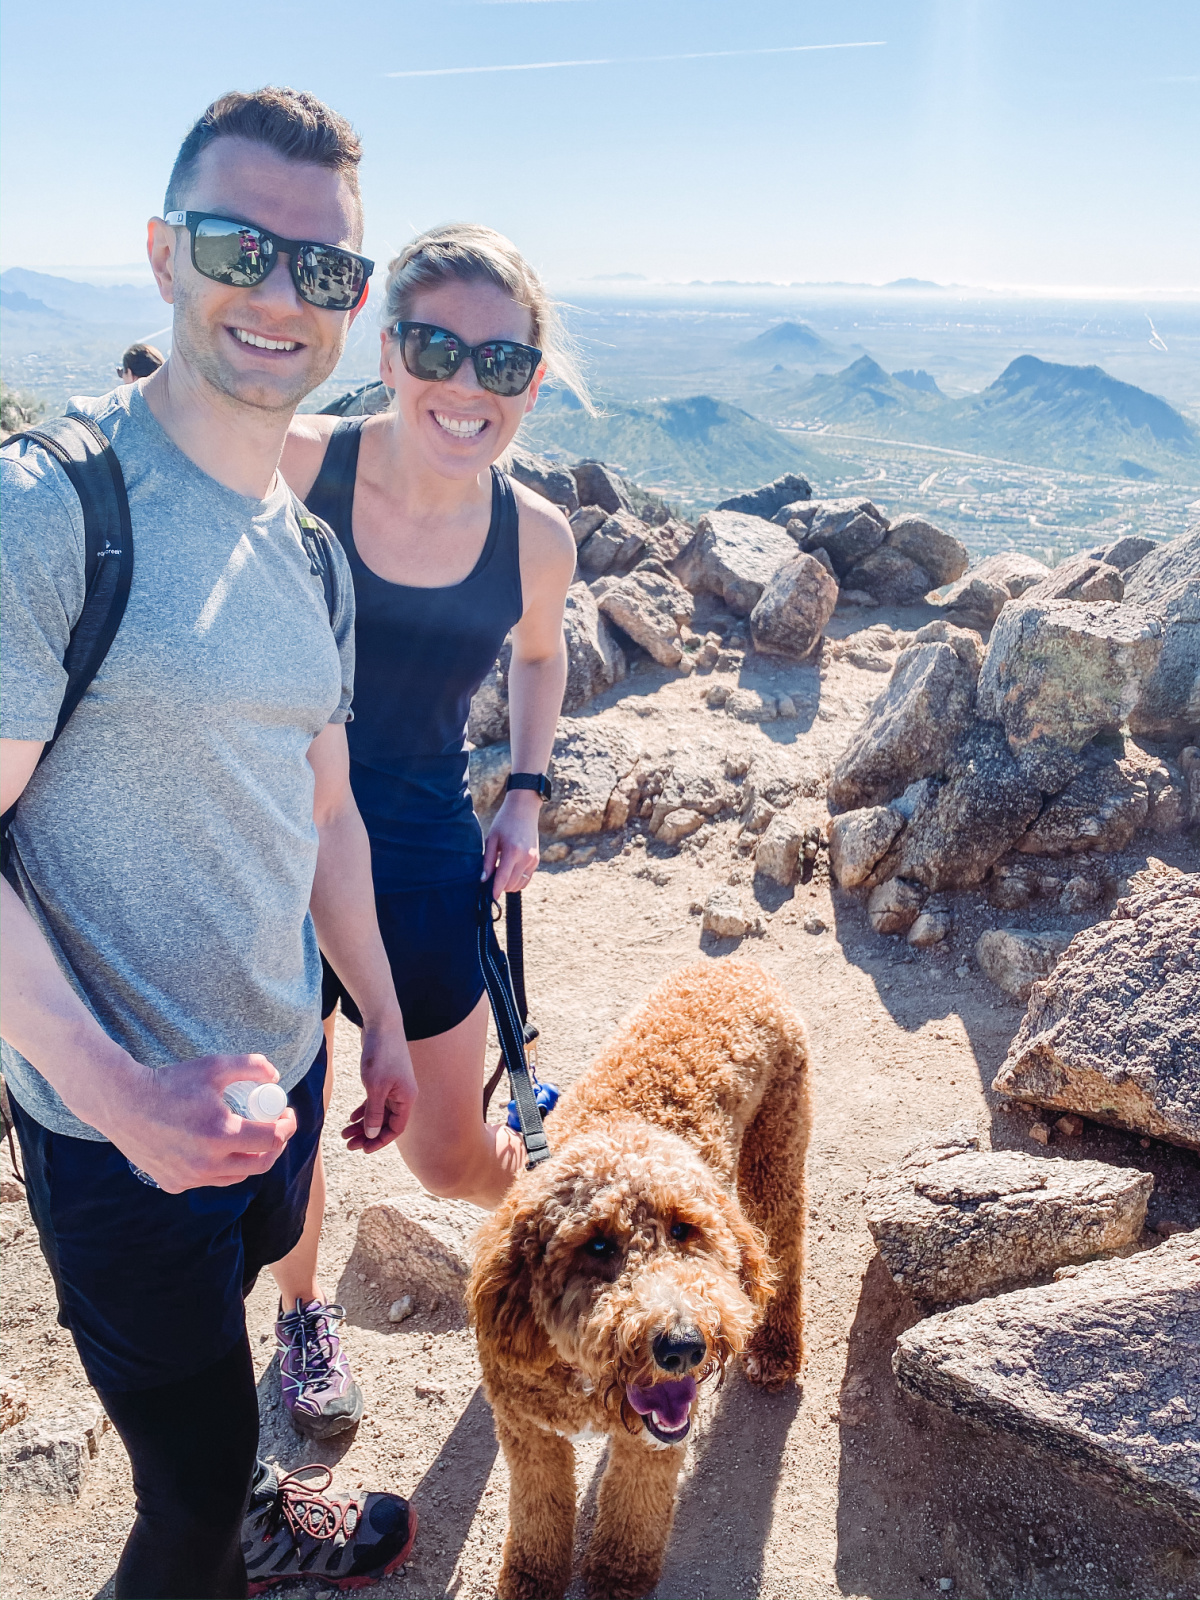 grant and hilari with a dog on a hike